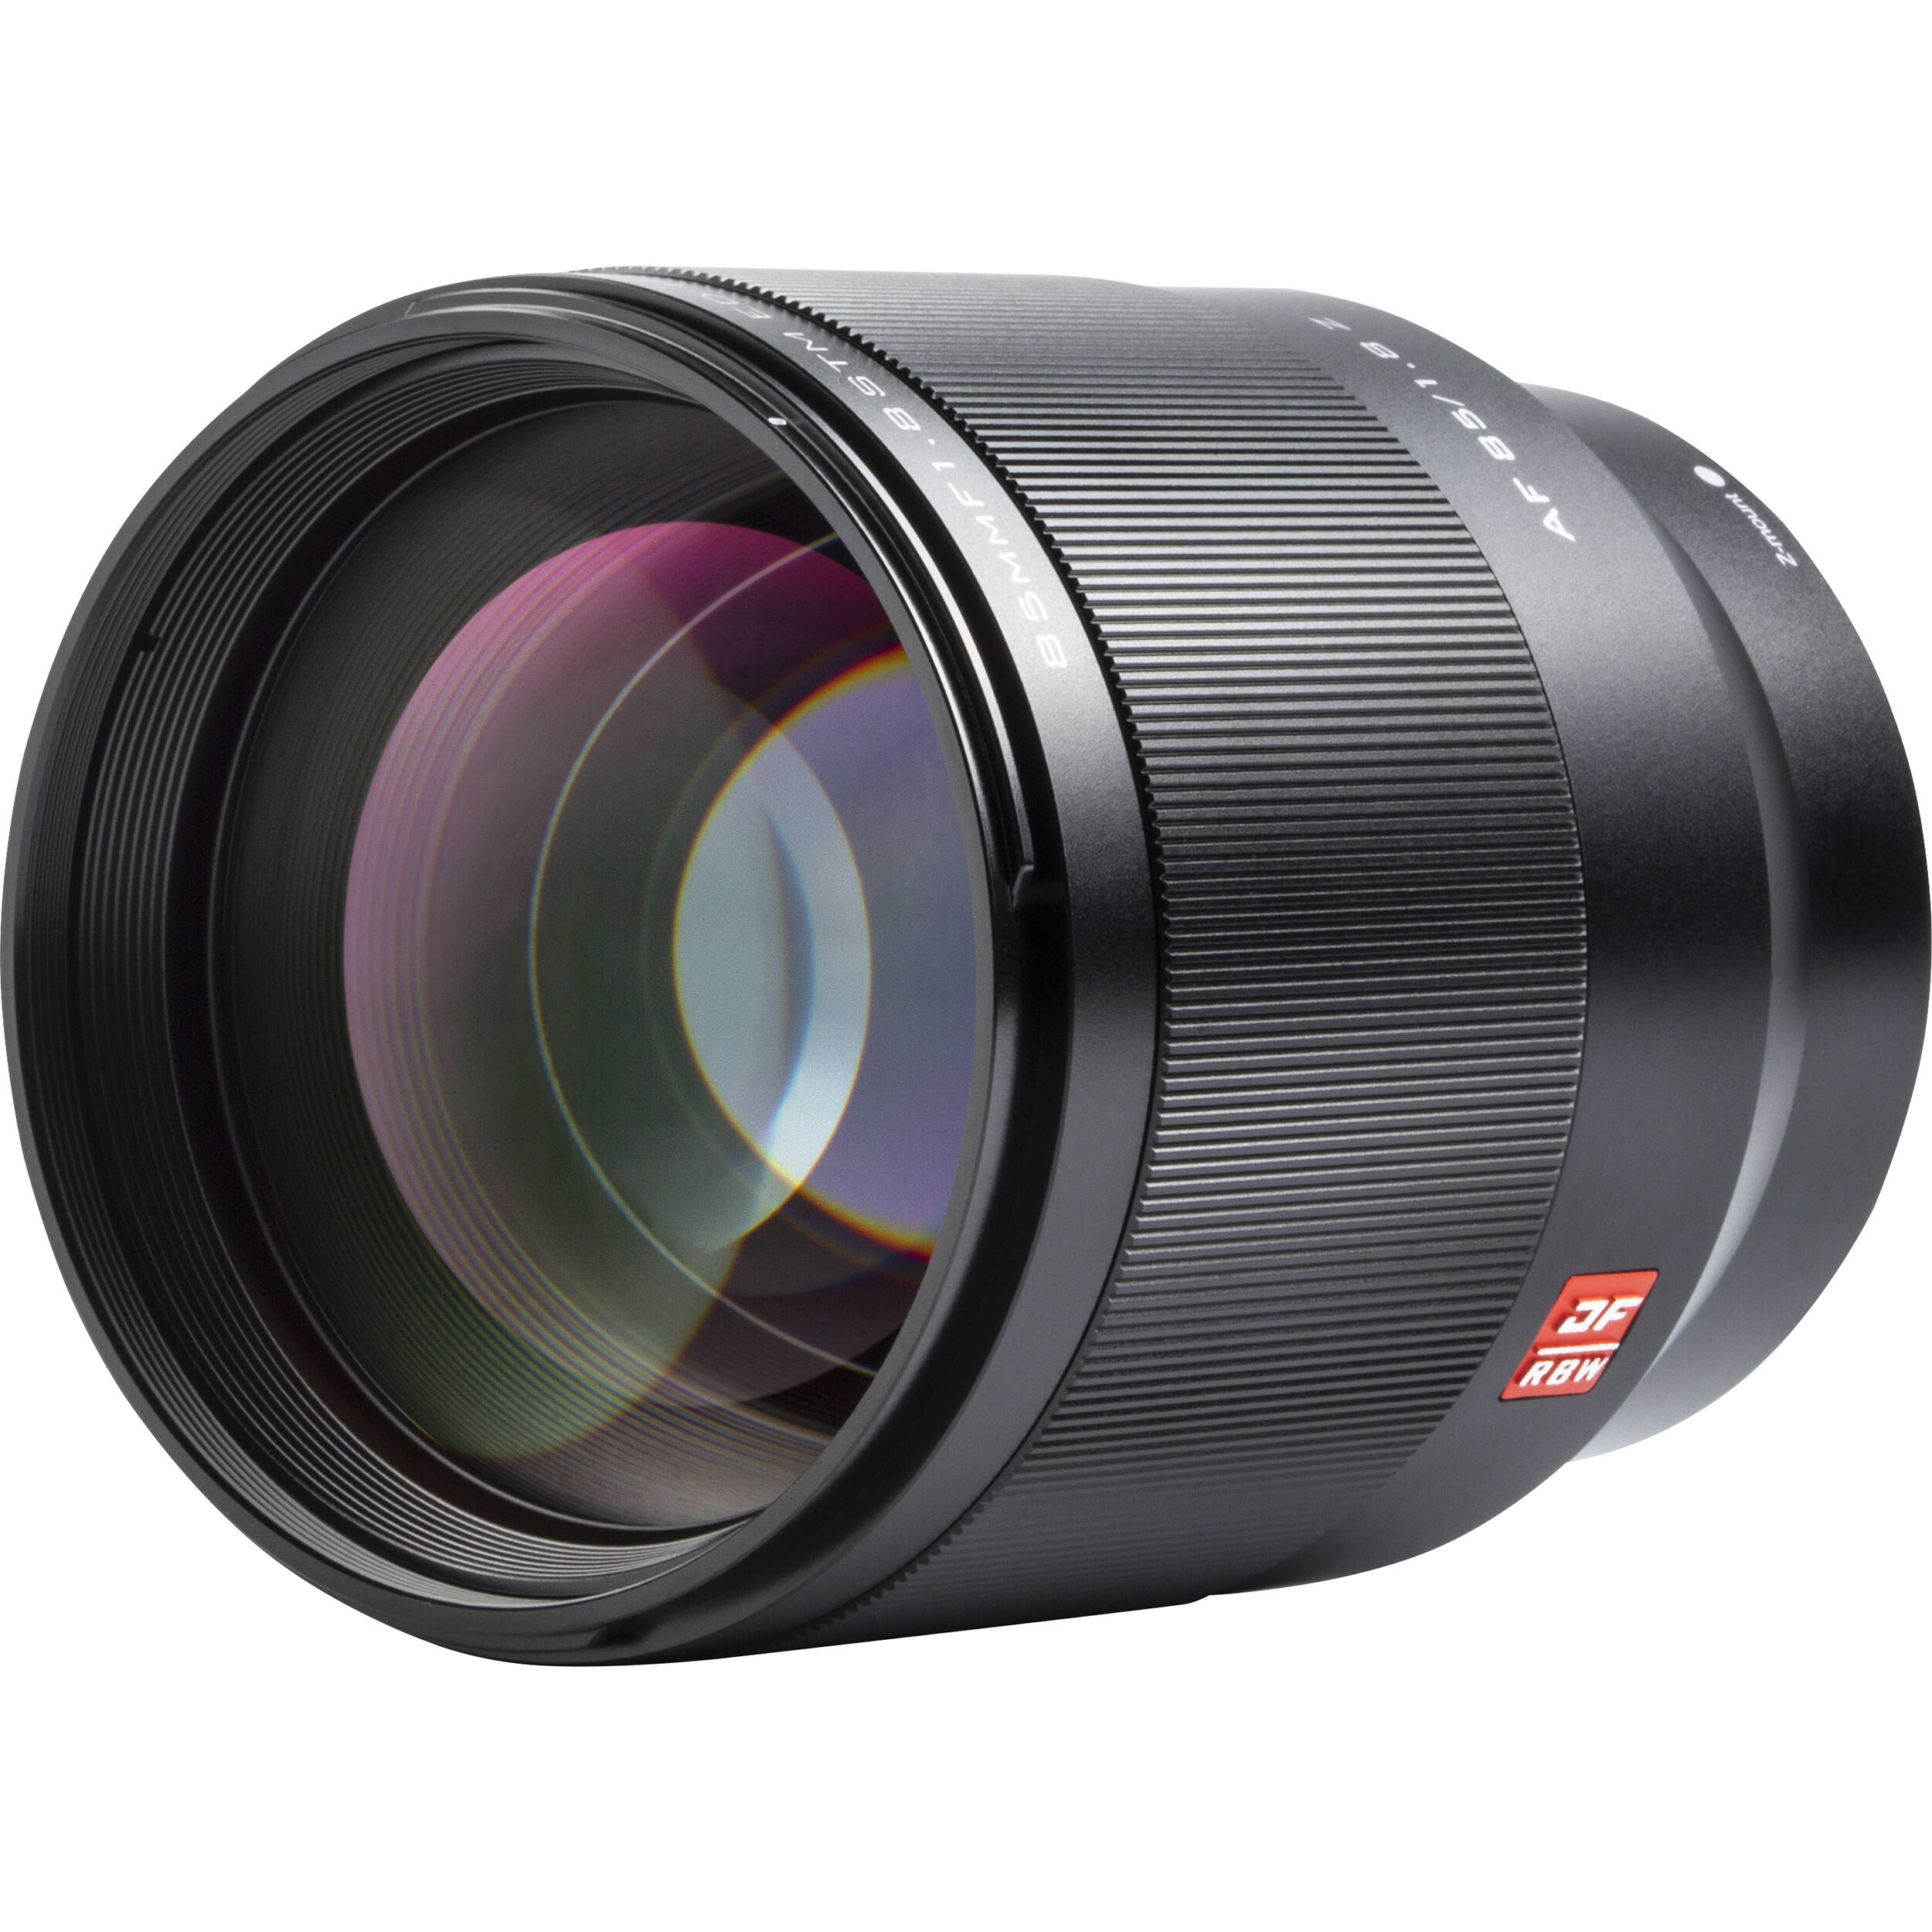 Ống Kính Viltrox 85mm f/1.8 II AF for Sony E